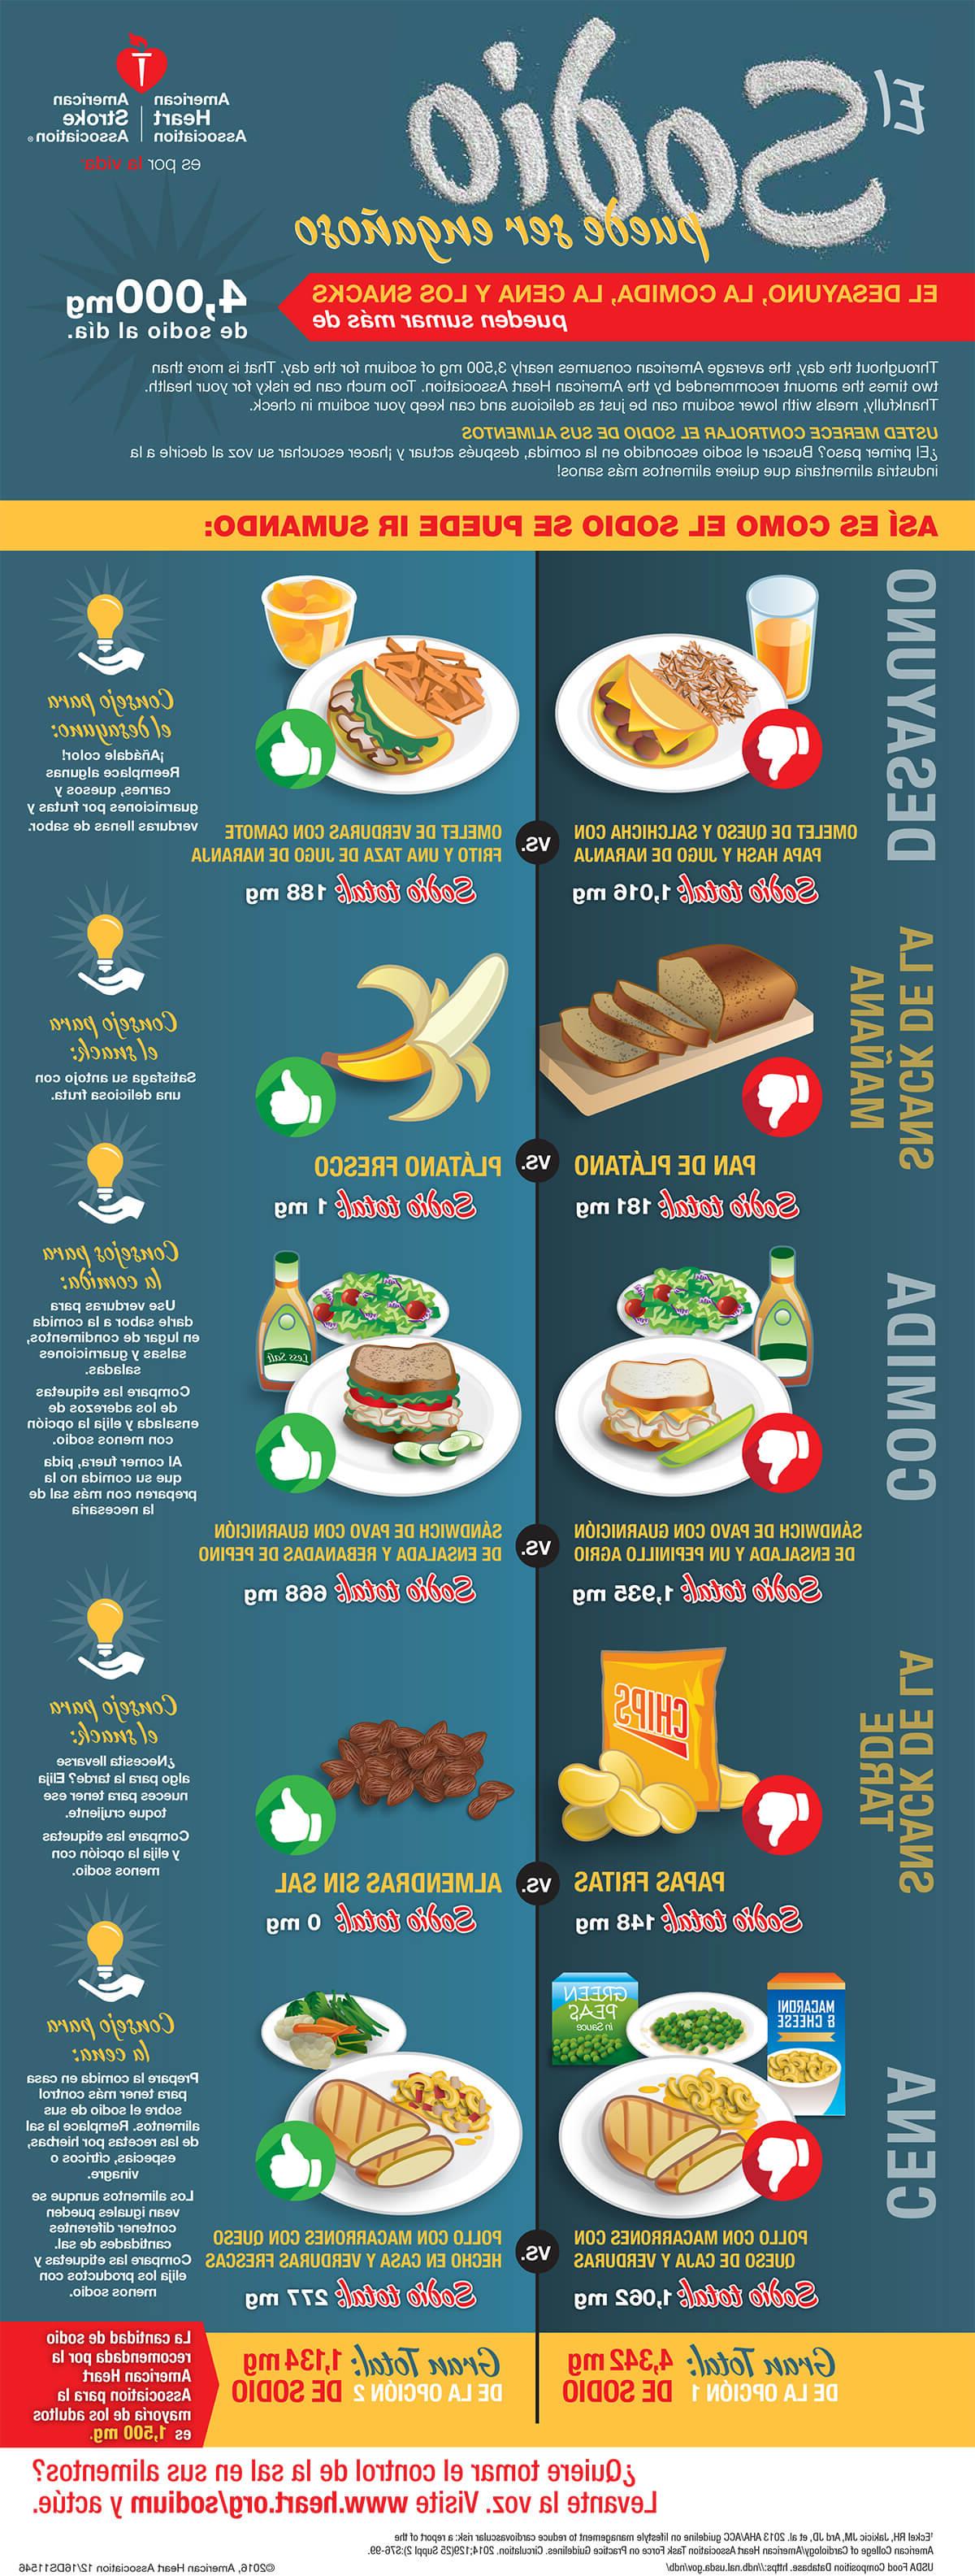 sodium can be sneaky infographic in spanish